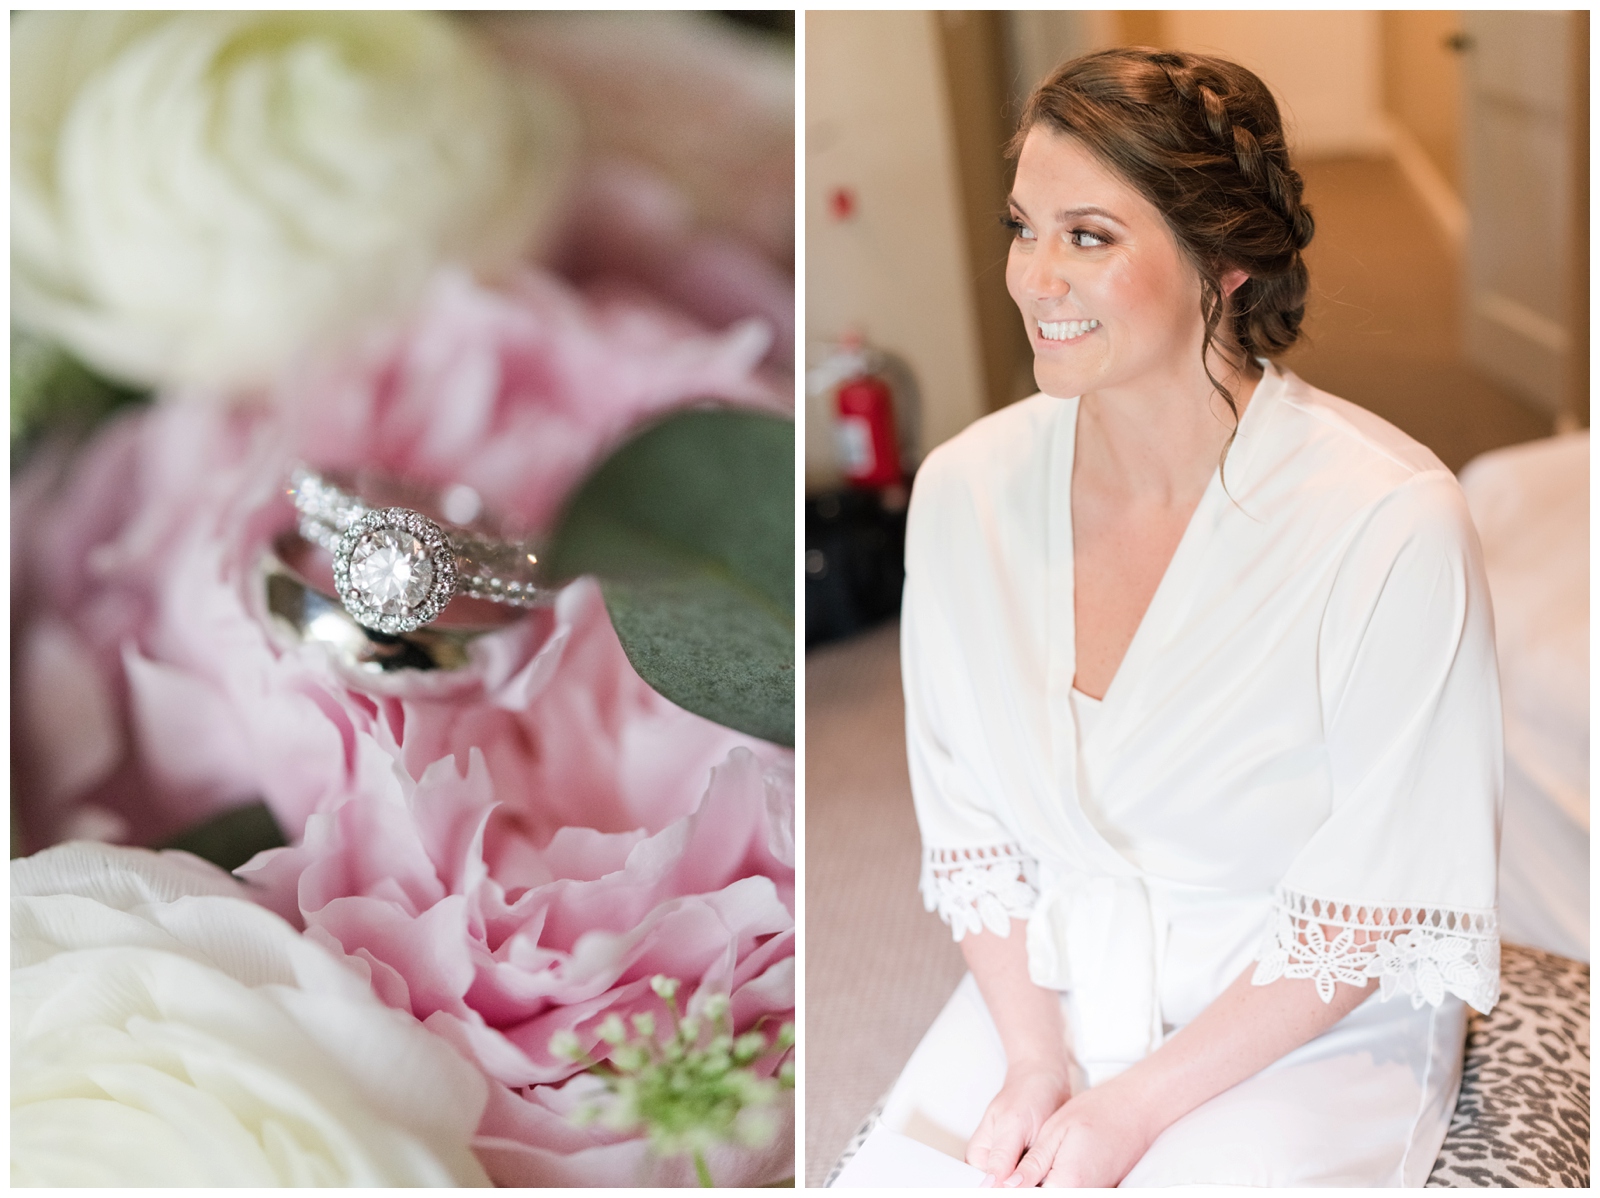 bride's diamond rings sit on pink peony and bride smiles with hair and makeup done before Ohio wedding day